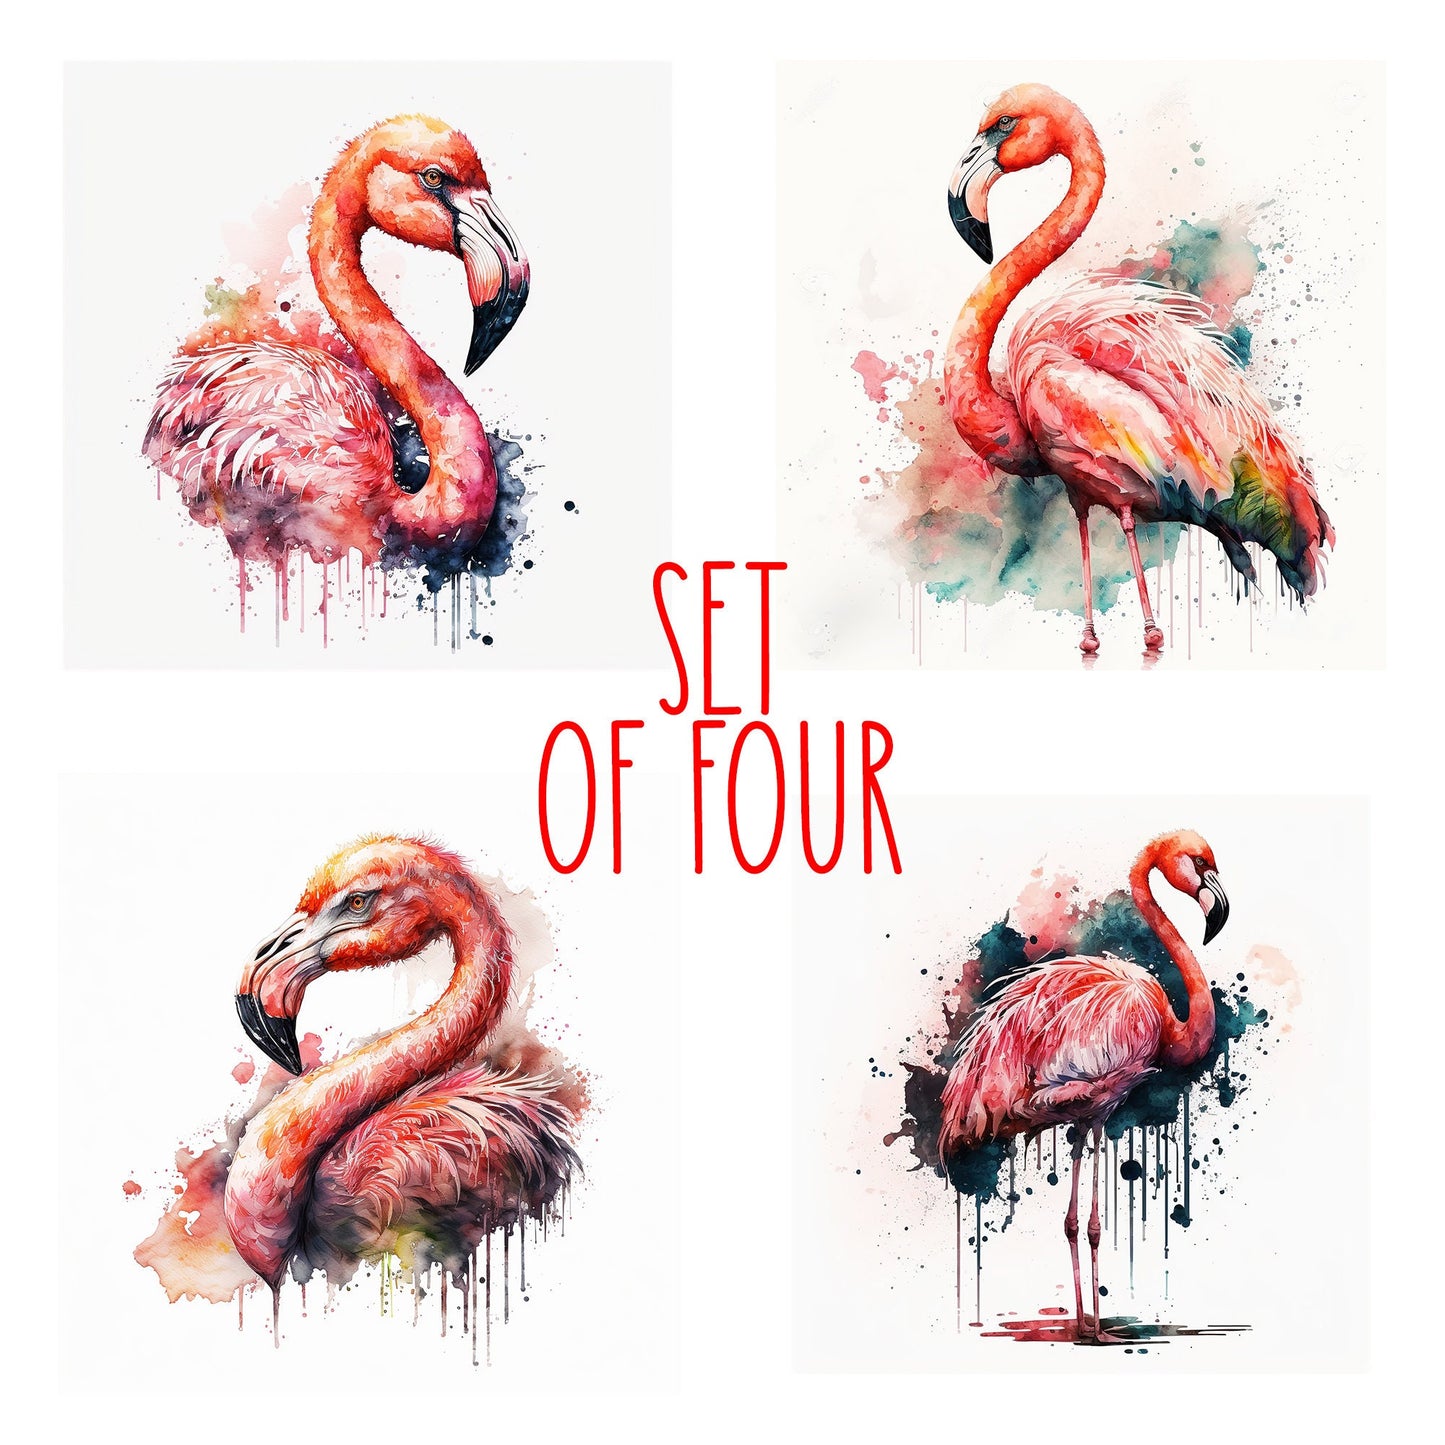 Watercolor Style Flamingo Art Decorative Ceramic Tile Set with Optional Easel Back - Available in 4 sizes - Set of 4